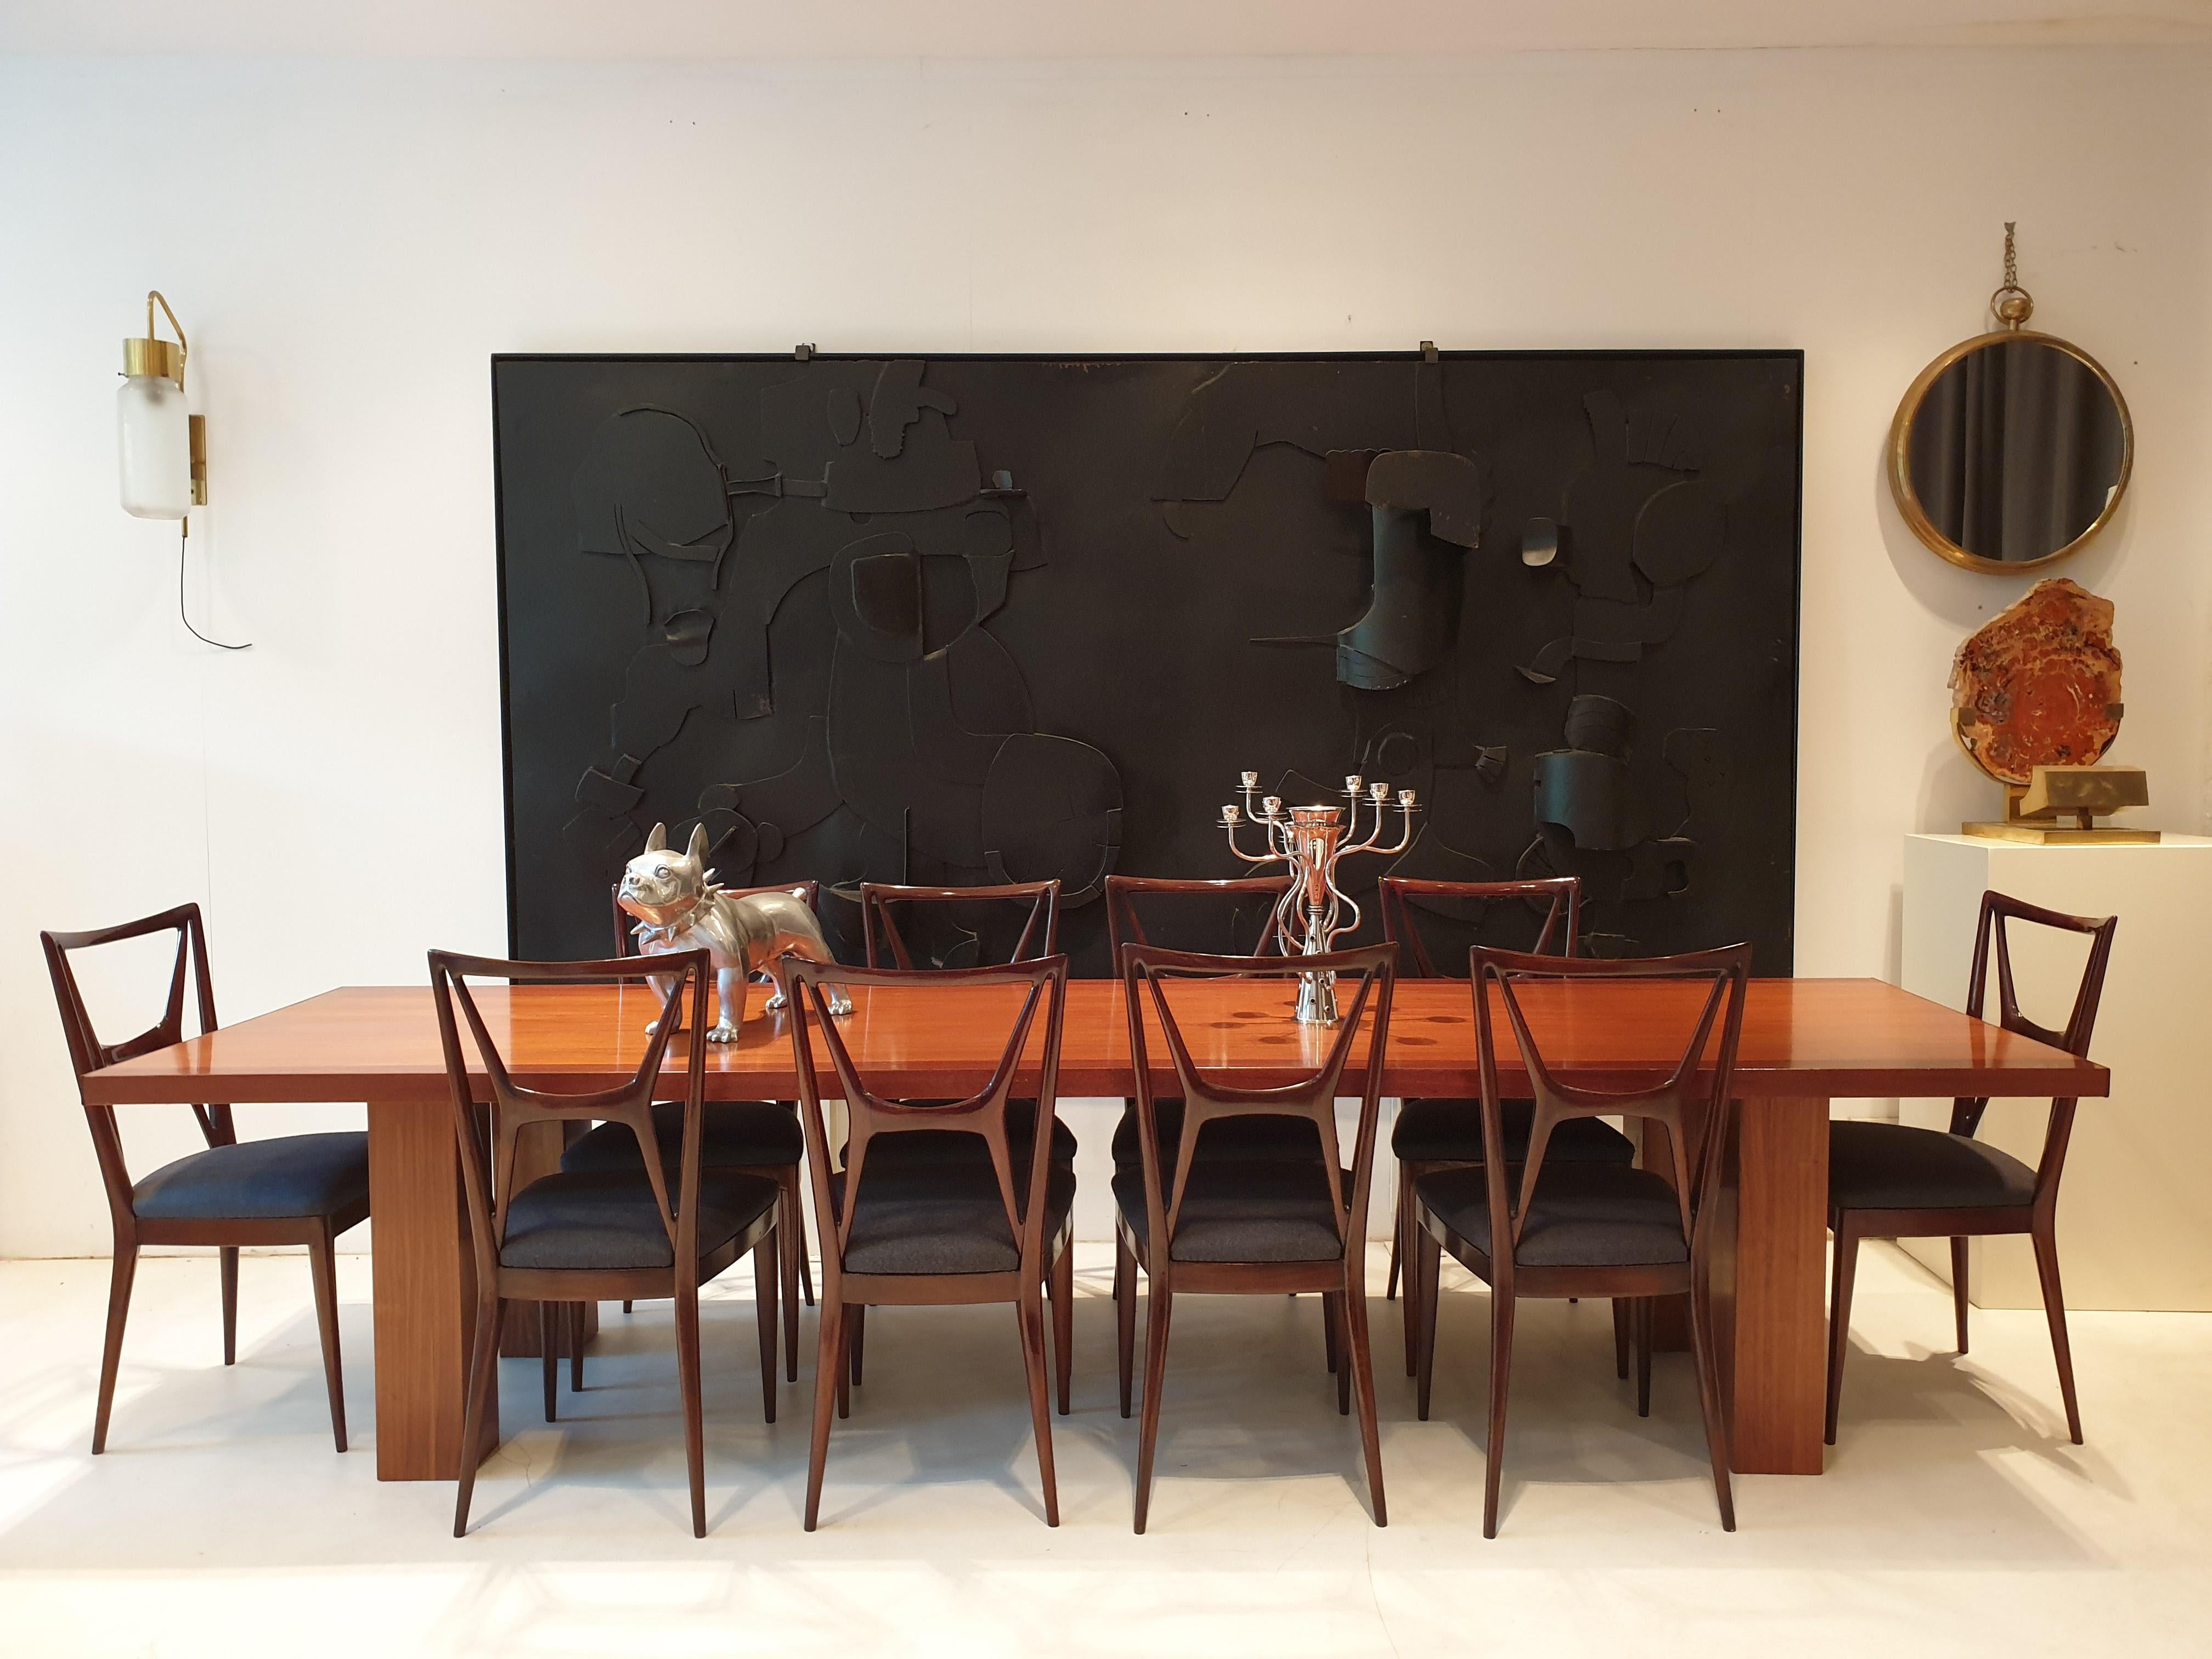 Set of 12 stunning dining chairs attributed to the work of Atelier Apelli and Varesio. Although the form is elegant and pared down, they are still sturdy and very comfortable. They have drop in seats in dark grey woolen fabric so should the